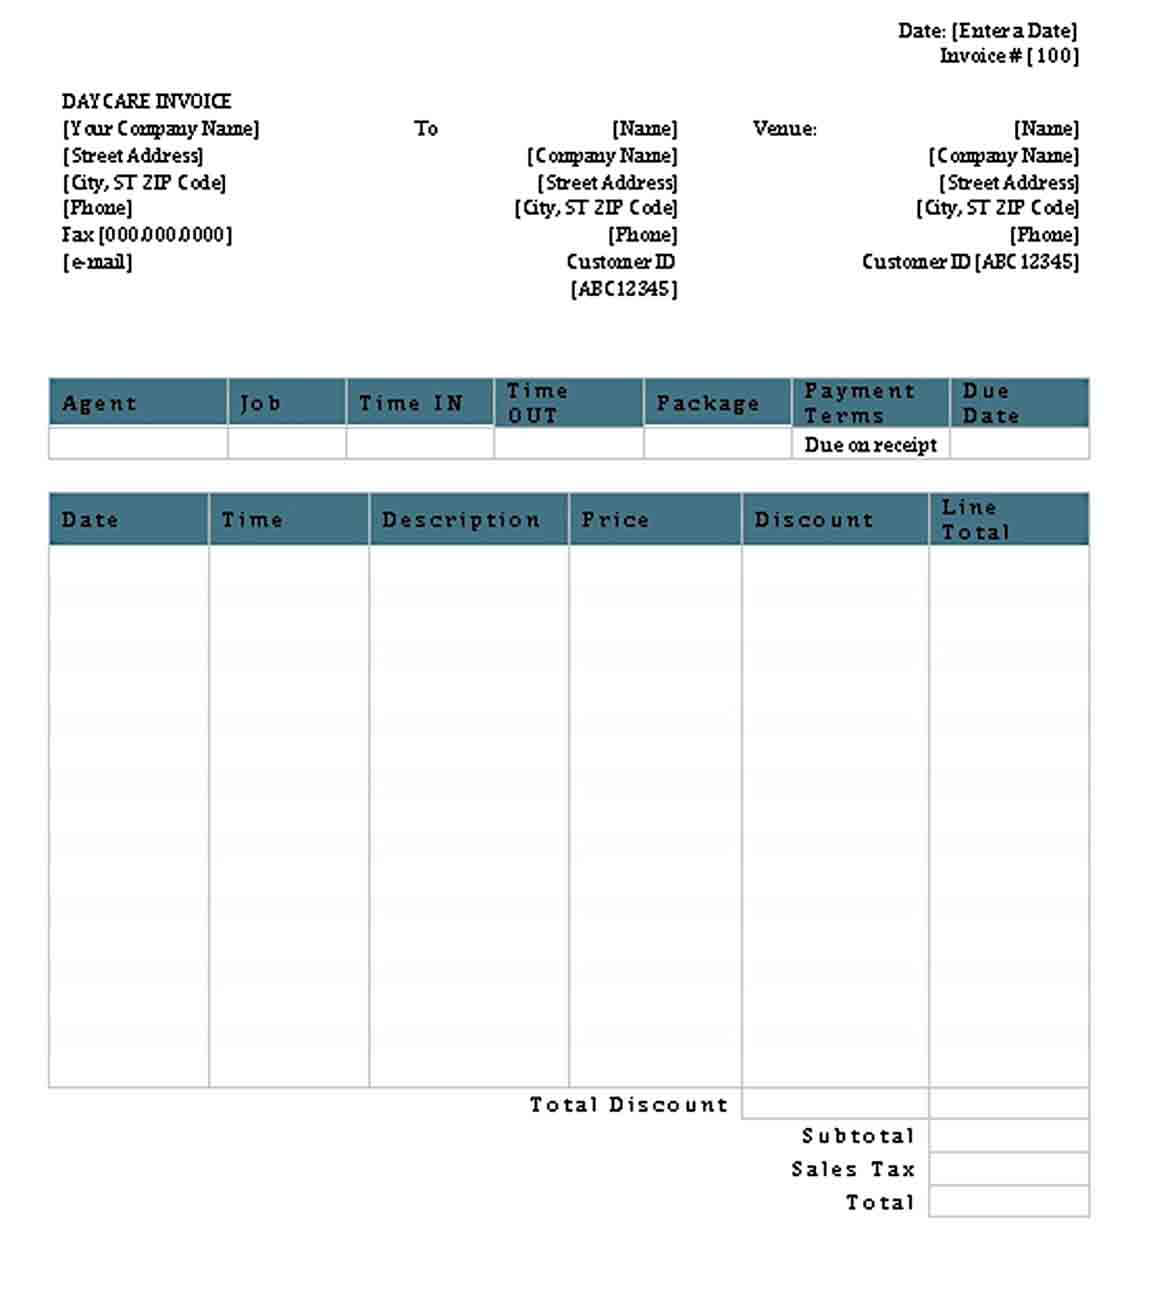 Sample Day Care Invoice ReceiptTemplate